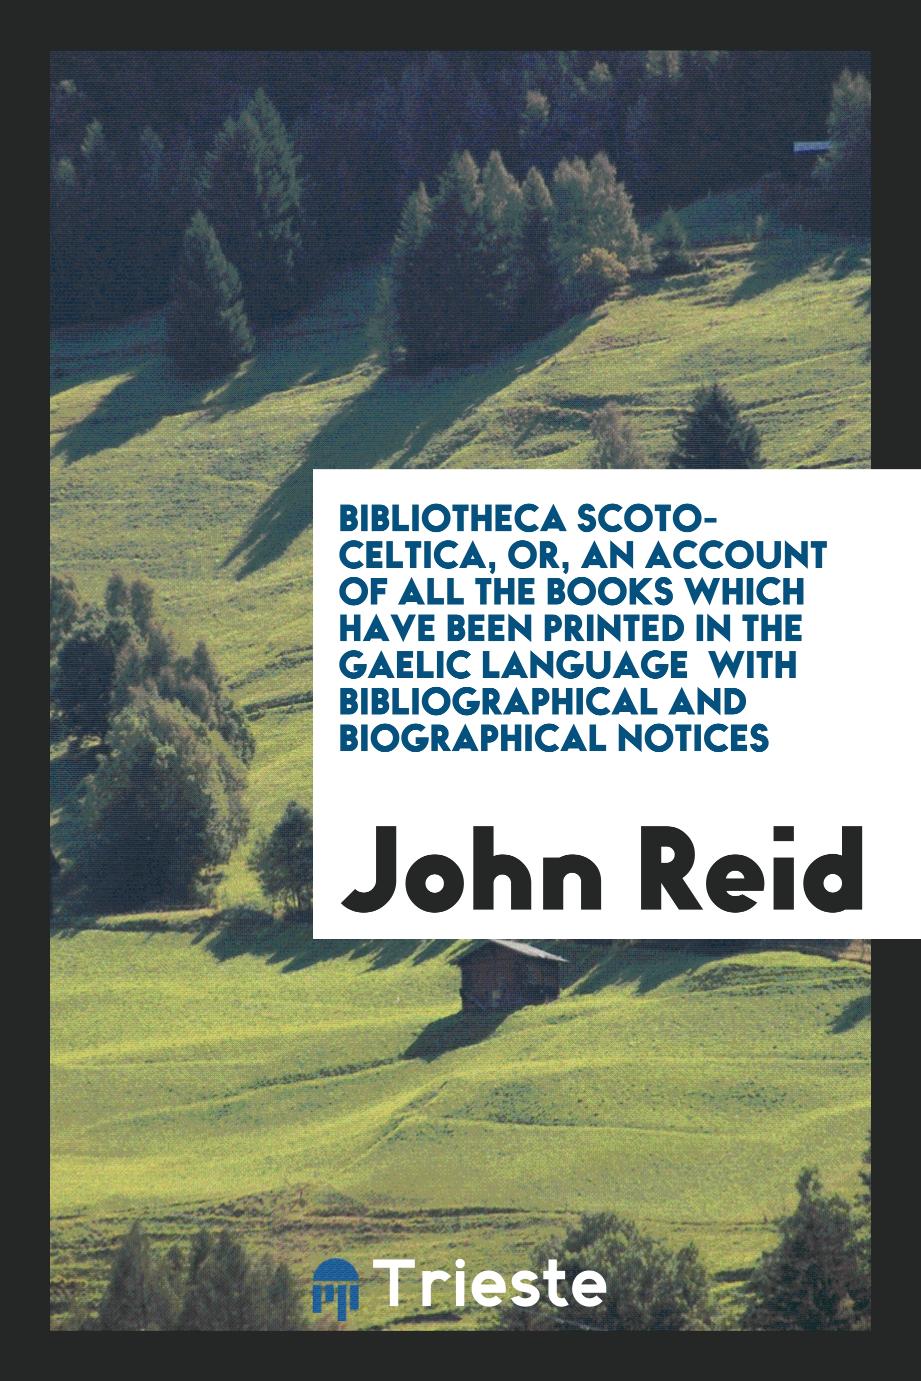 Bibliotheca Scoto-Celtica, or, An account of all the books which have been printed in the Gaelic language with bibliographical and biographical notices